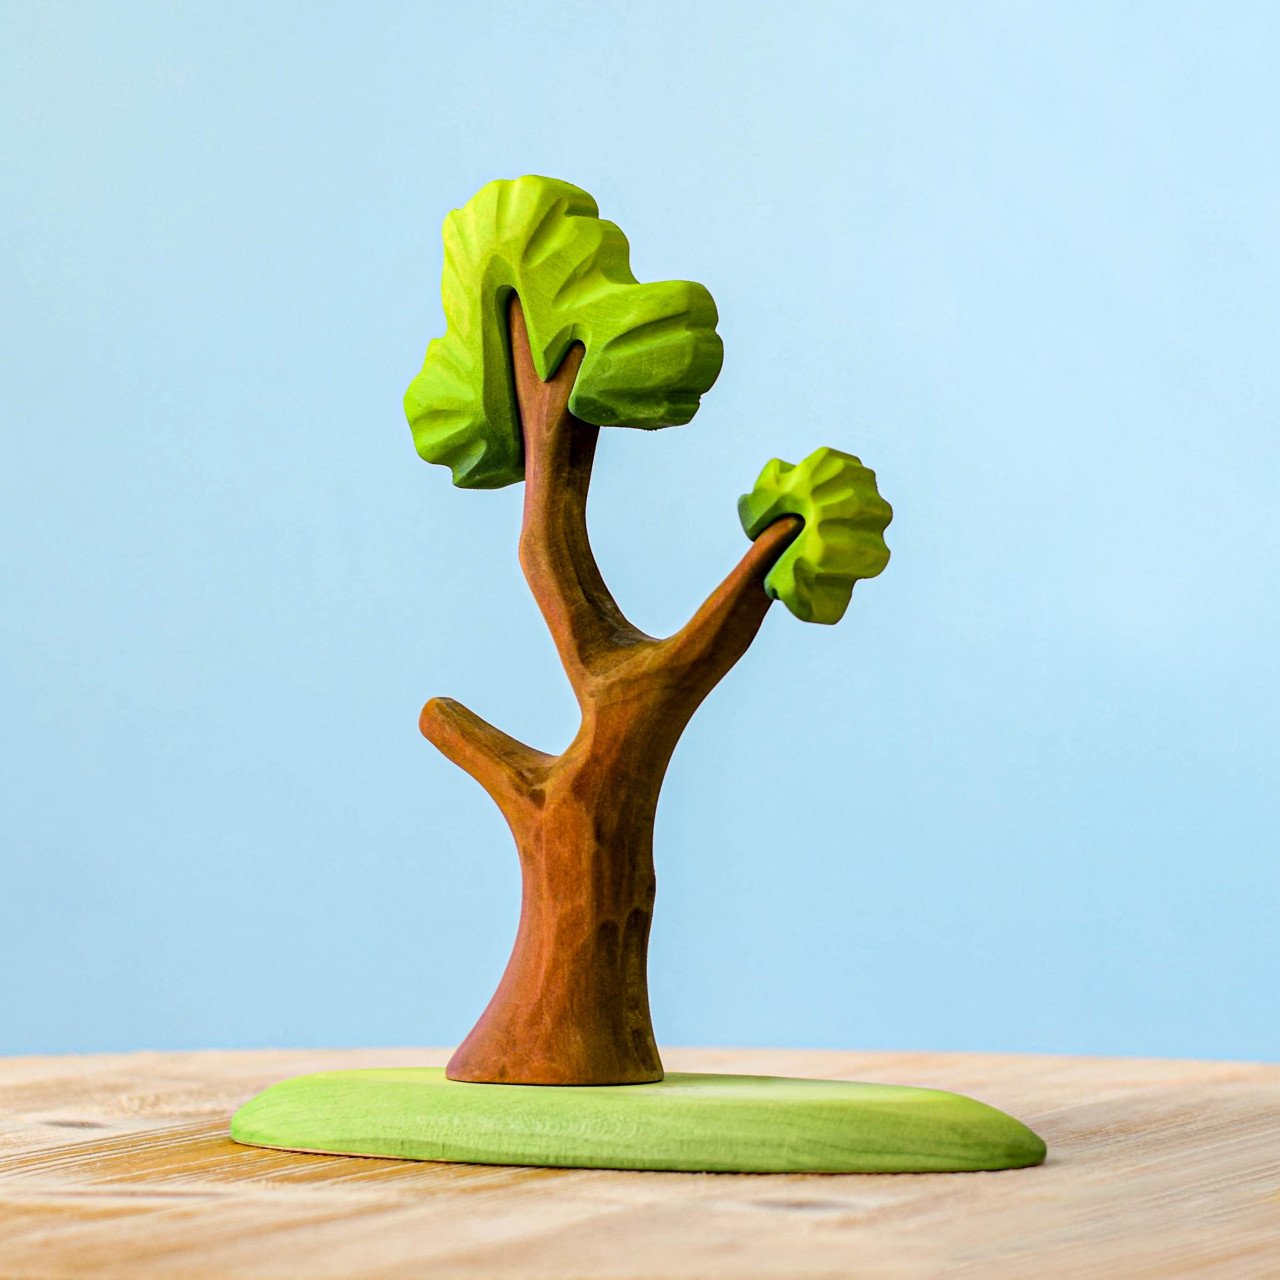 Bumbutoys.com | Handcrafted Wooden Toys for Inspired Play